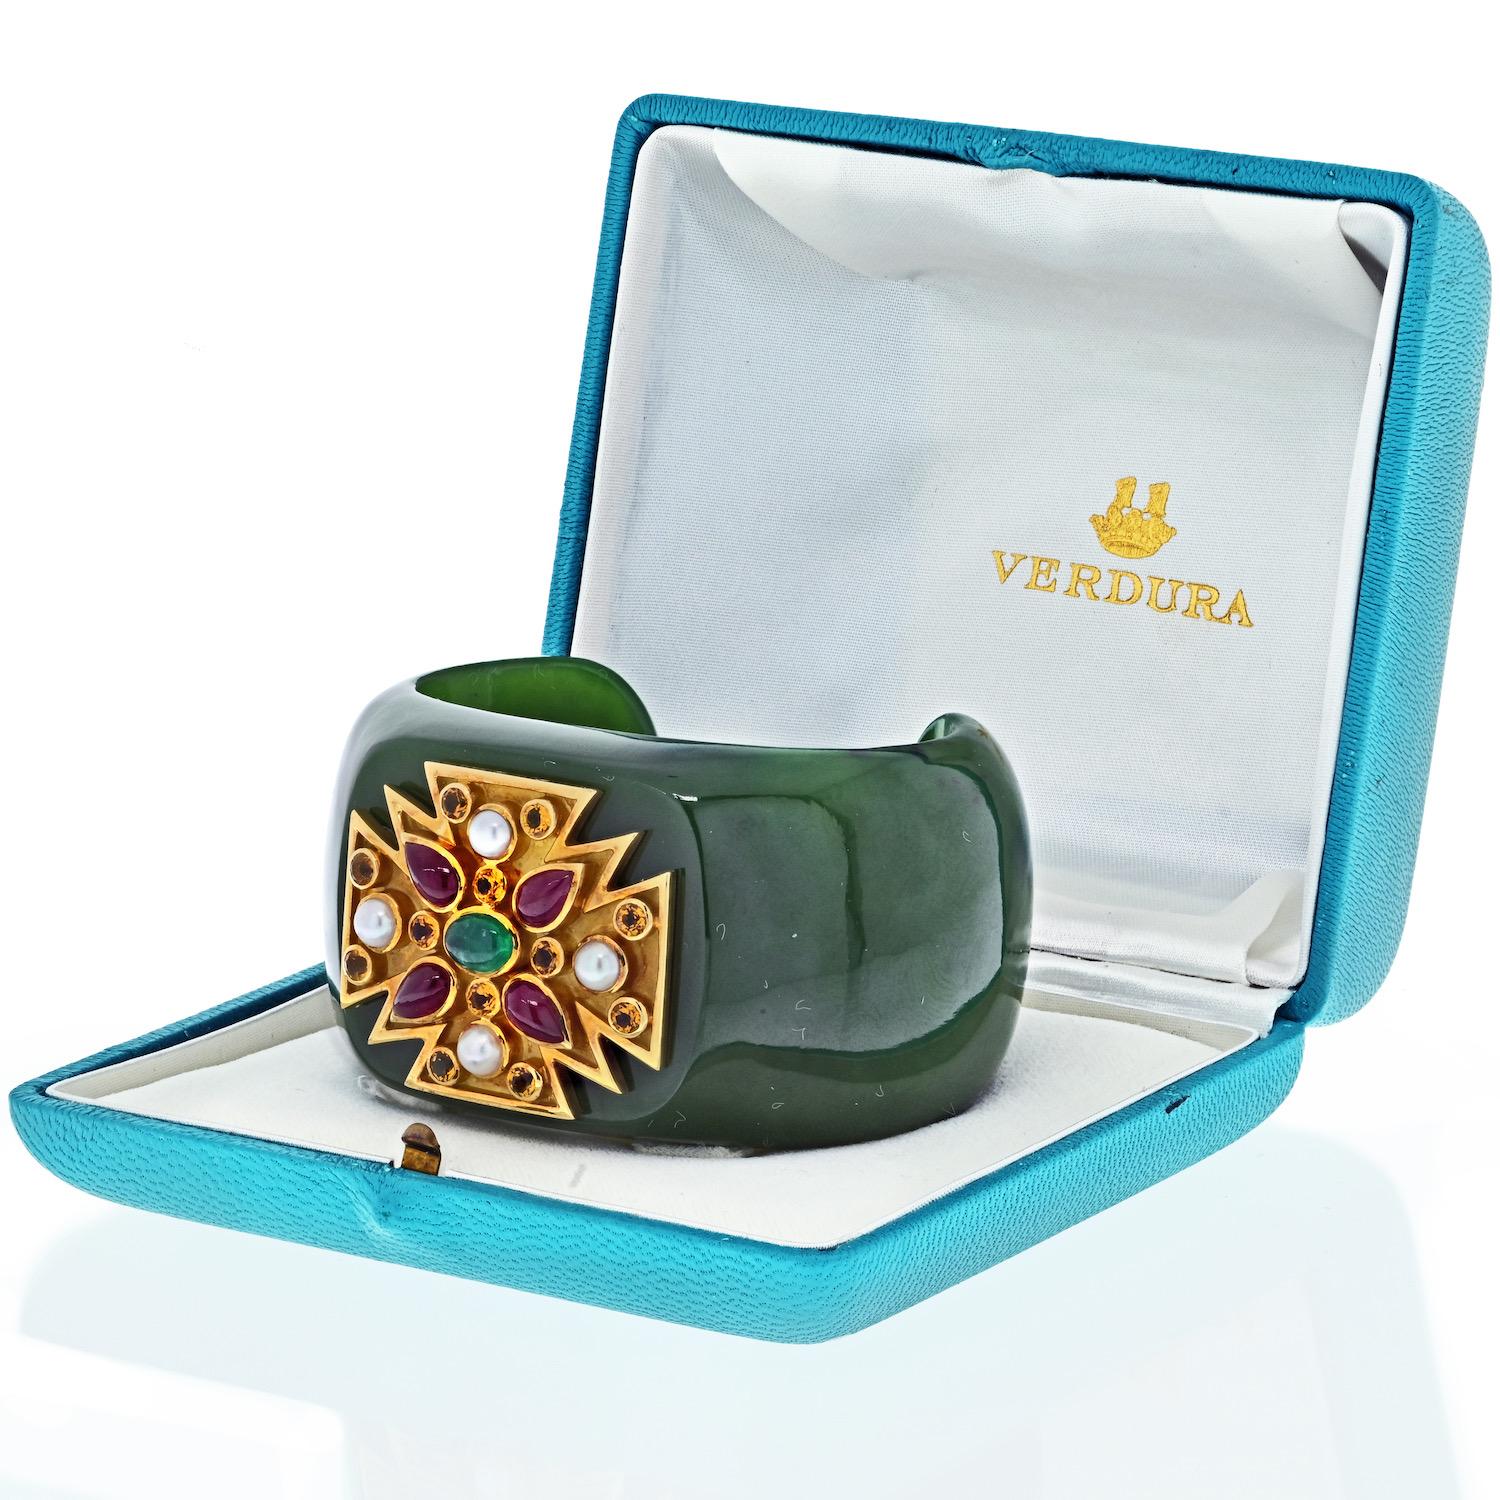 Featuring a Maltese cross with pearls, rubies, and emerald in the center fo the jadiate cuff this open bangle by Verdura is a stellar example of its type. This particular bangle is especially well made and is in exceptionally good condition. It is